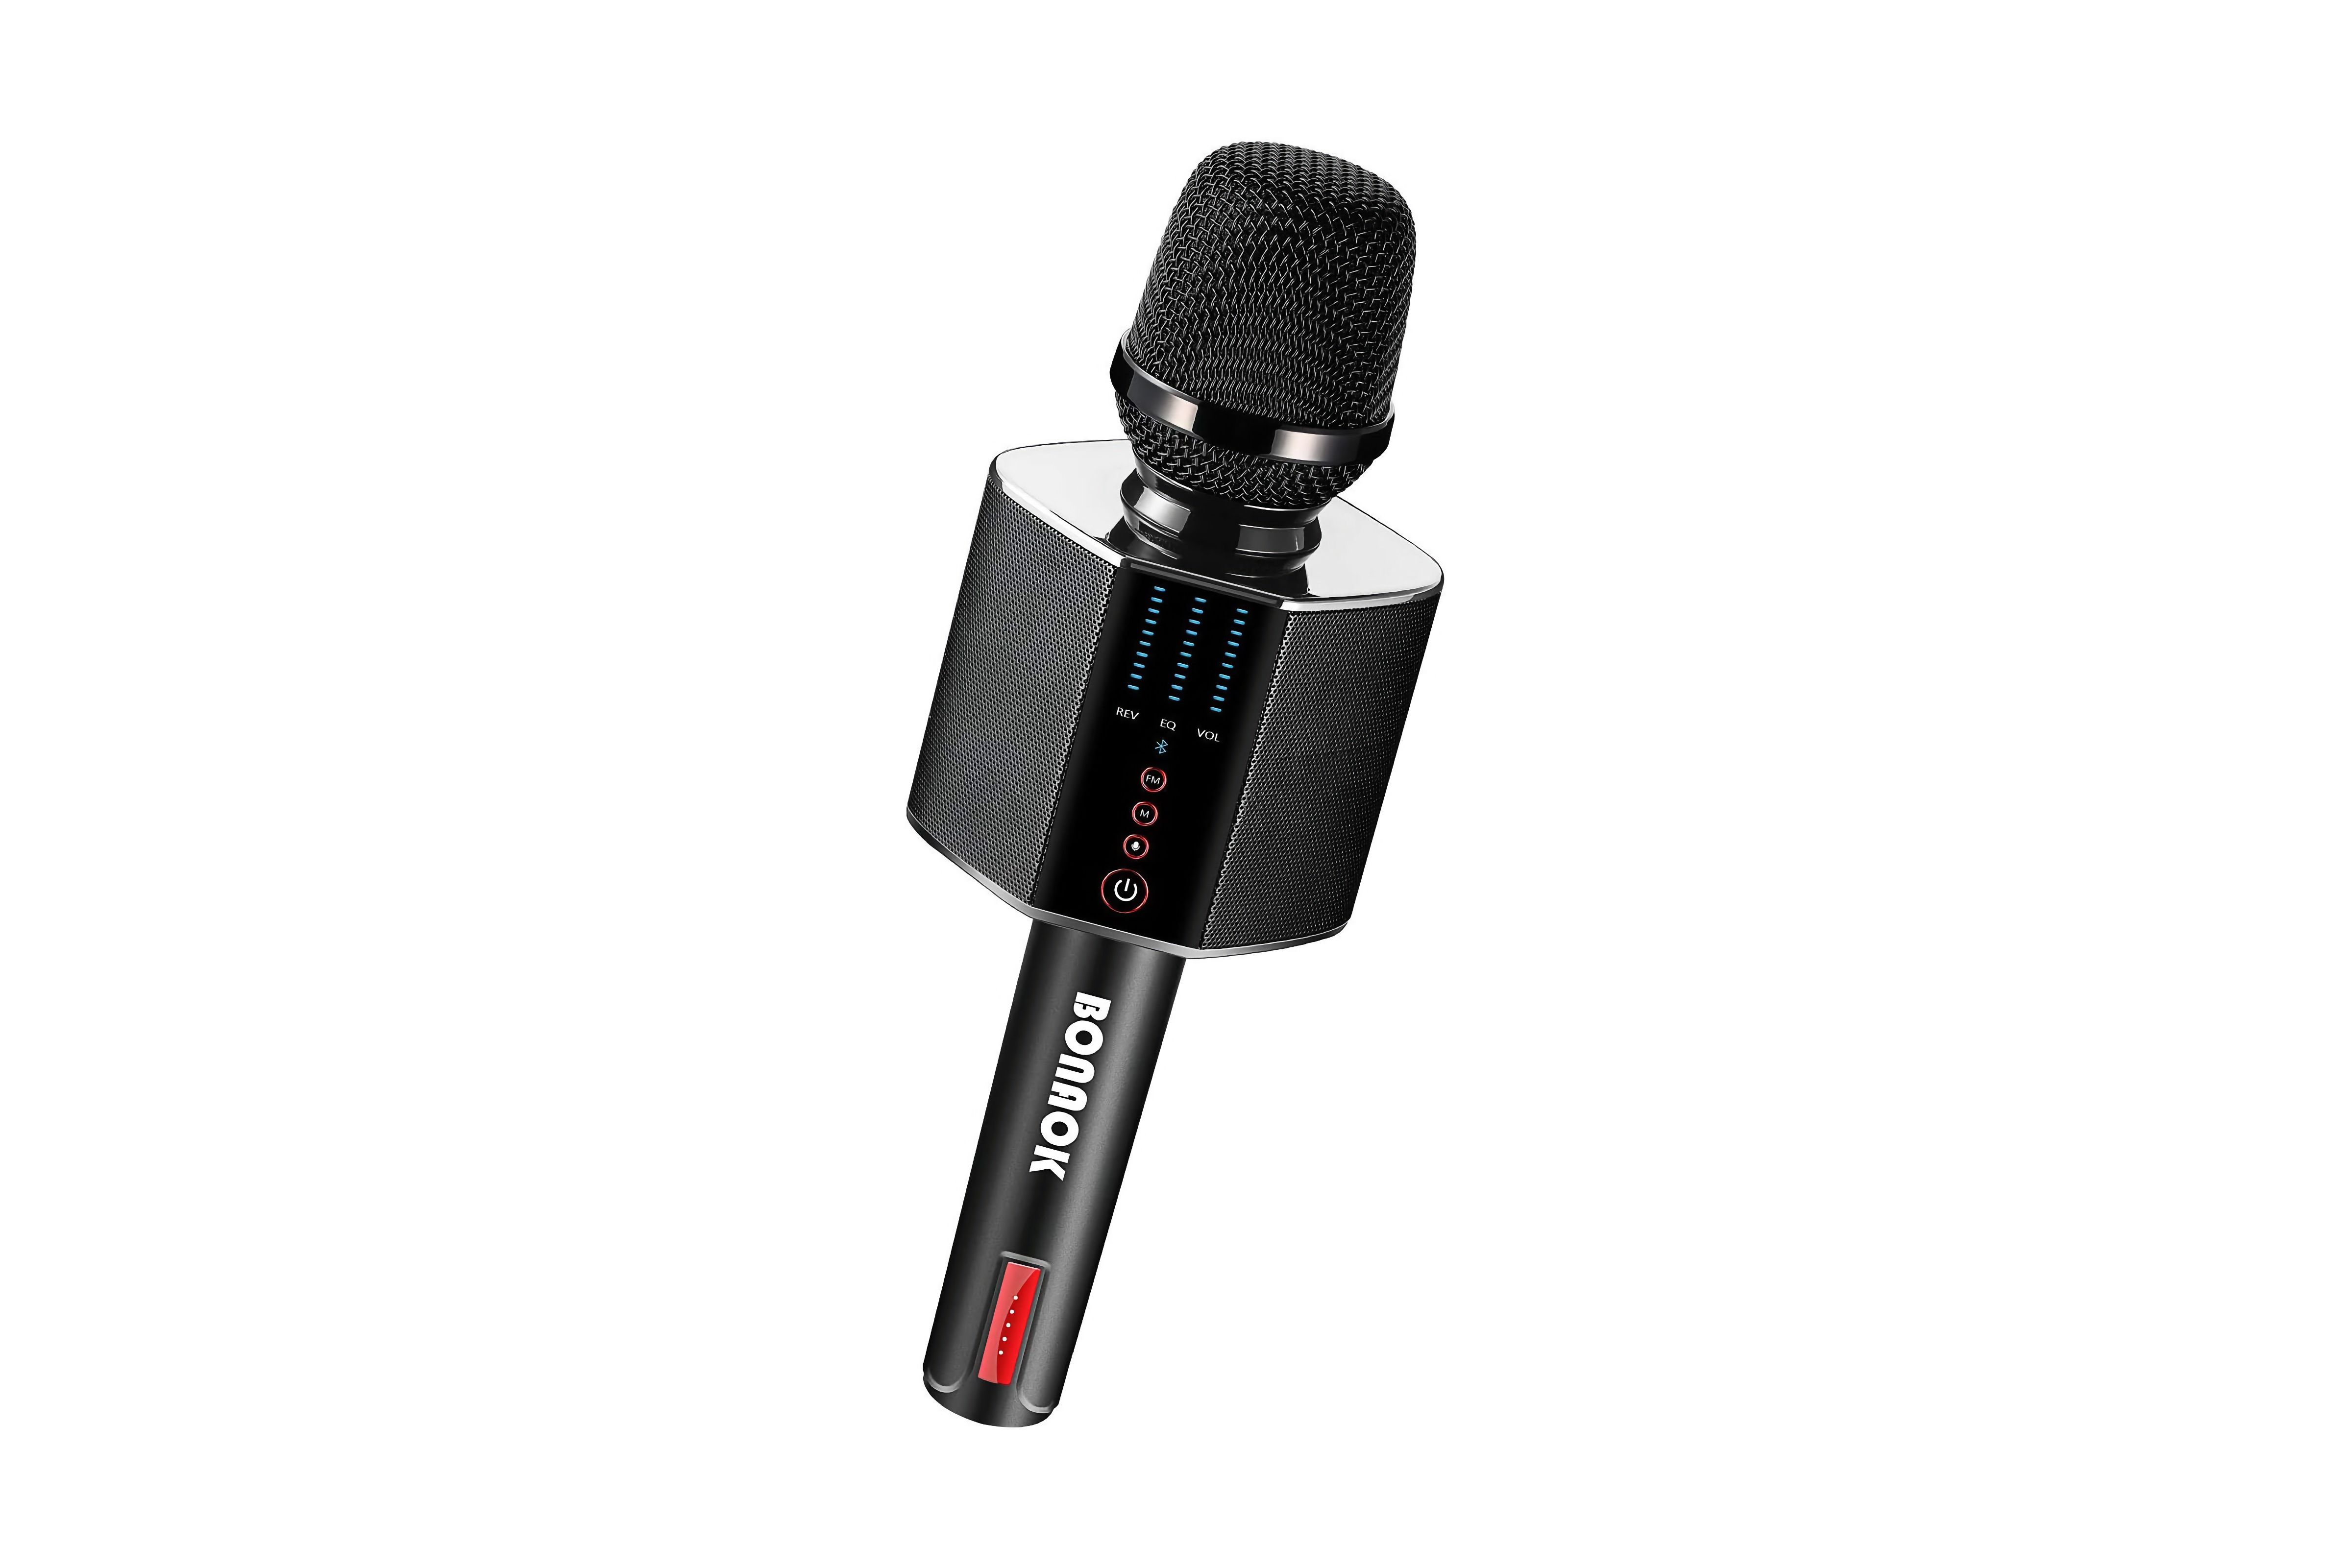 A black Bluetooth microphone with a built-in speaker in the middle.